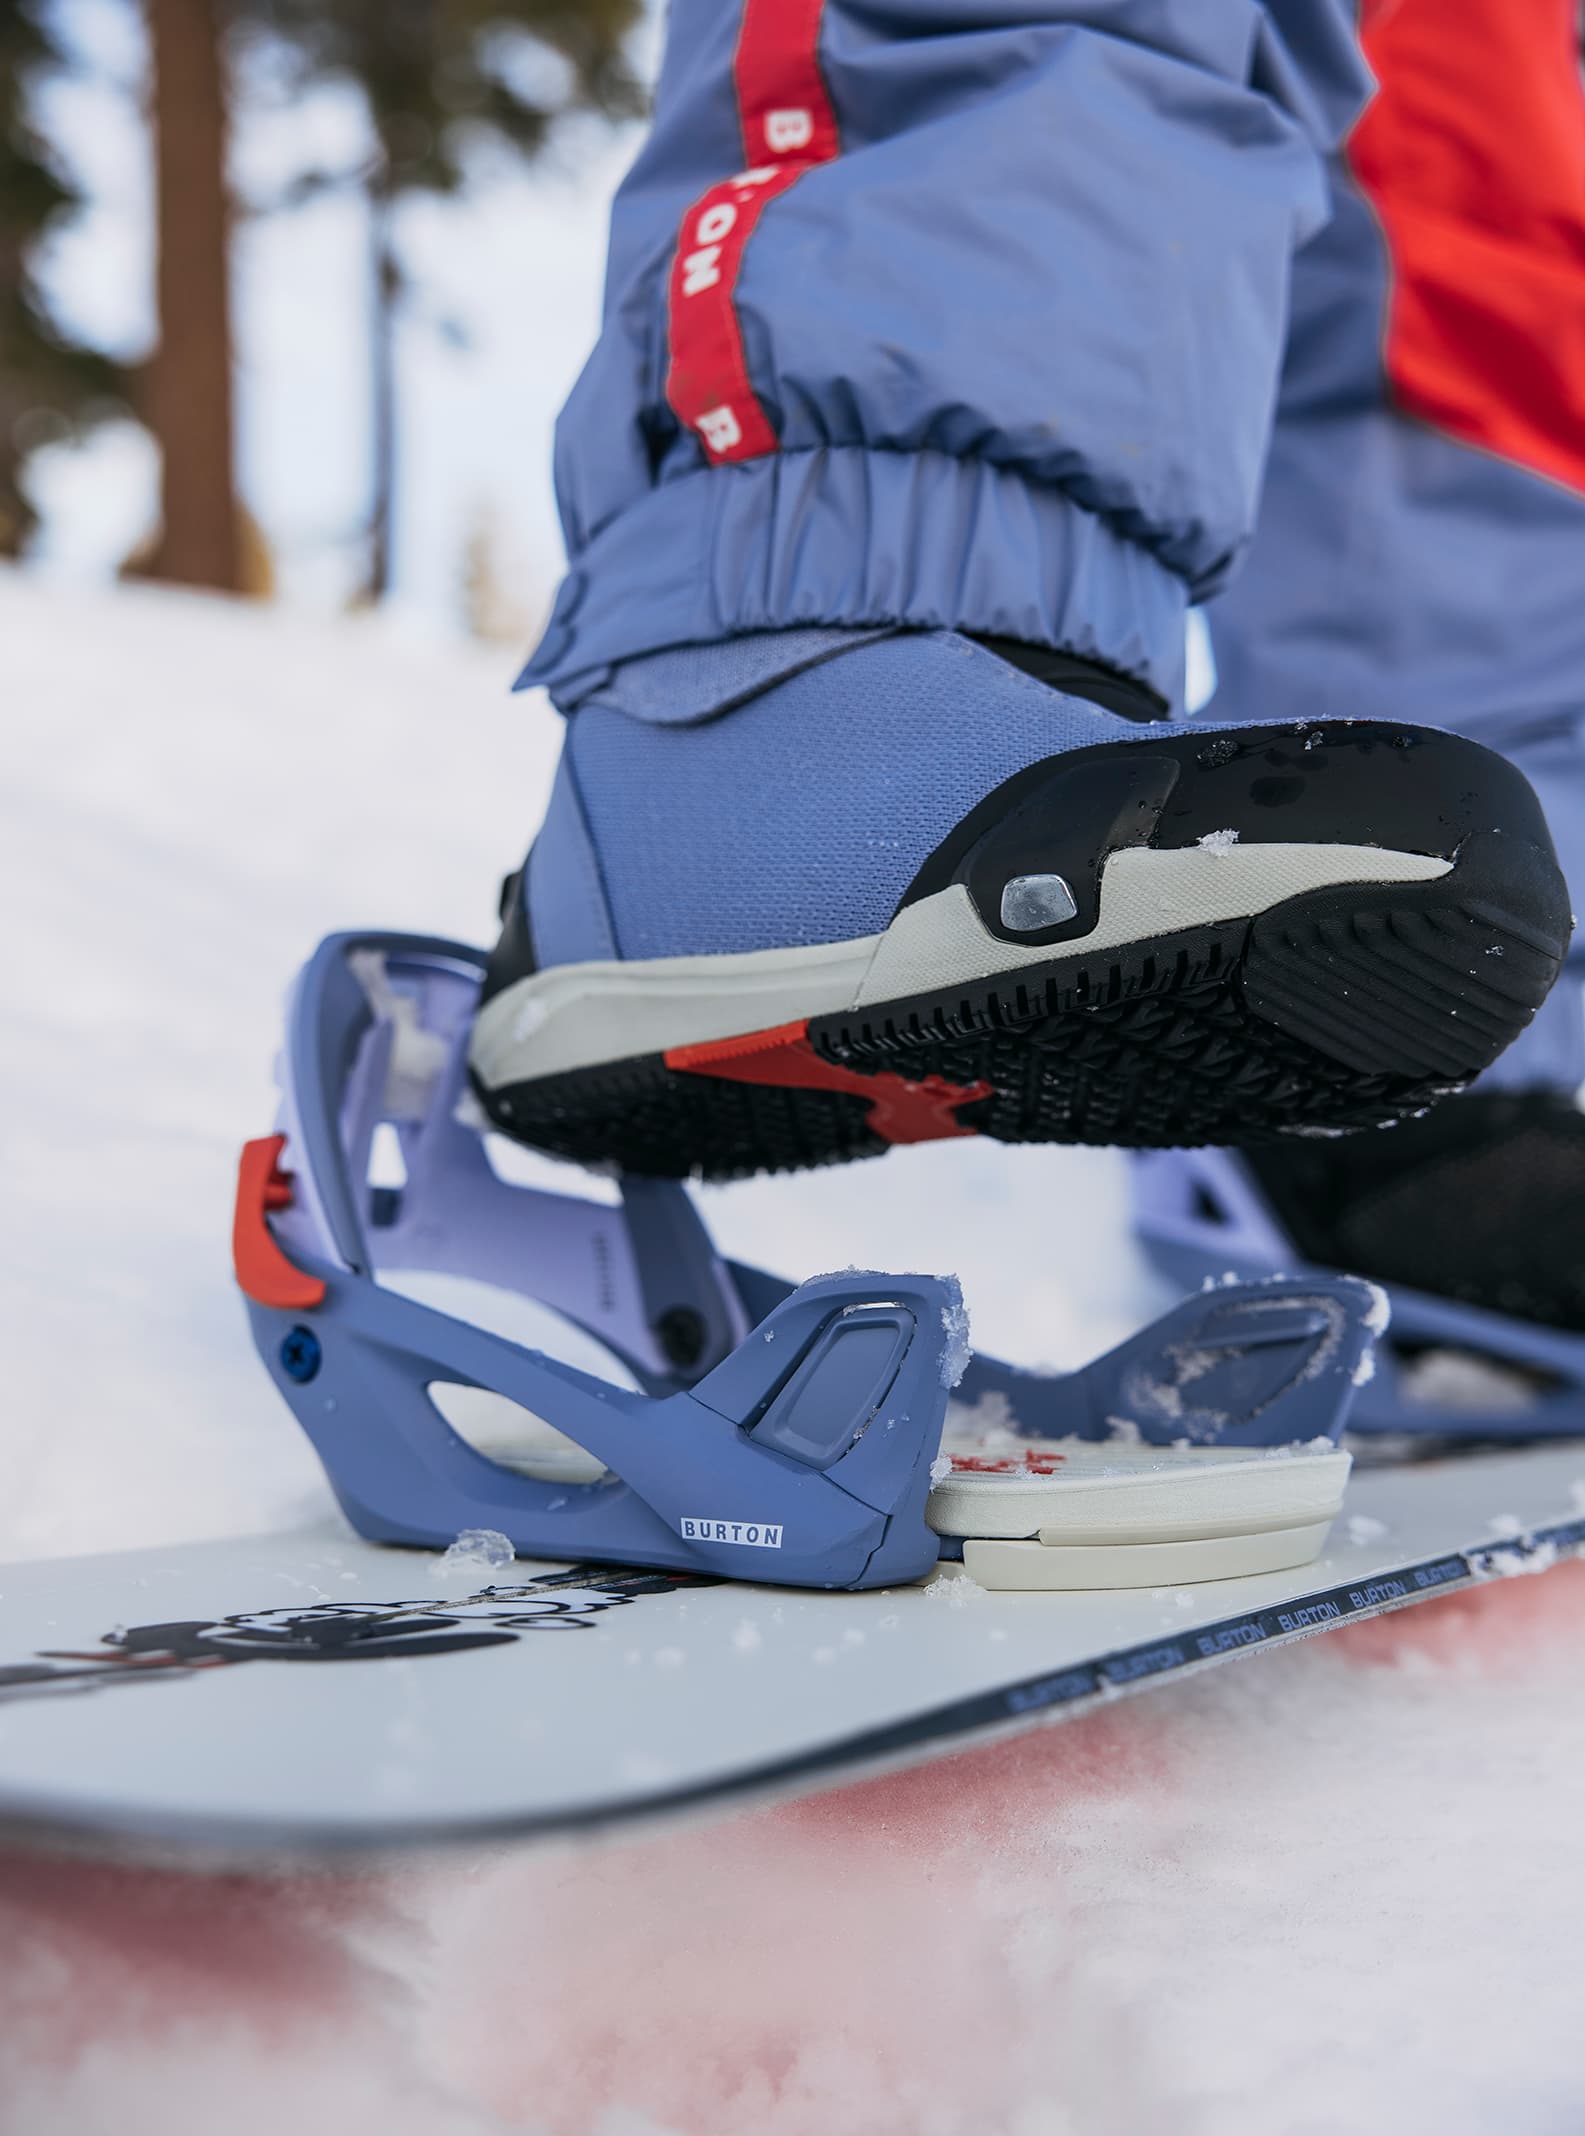 Burton Step-On bindings review: Step-On Loback will make you rethink your  snowboard setup - The Manual